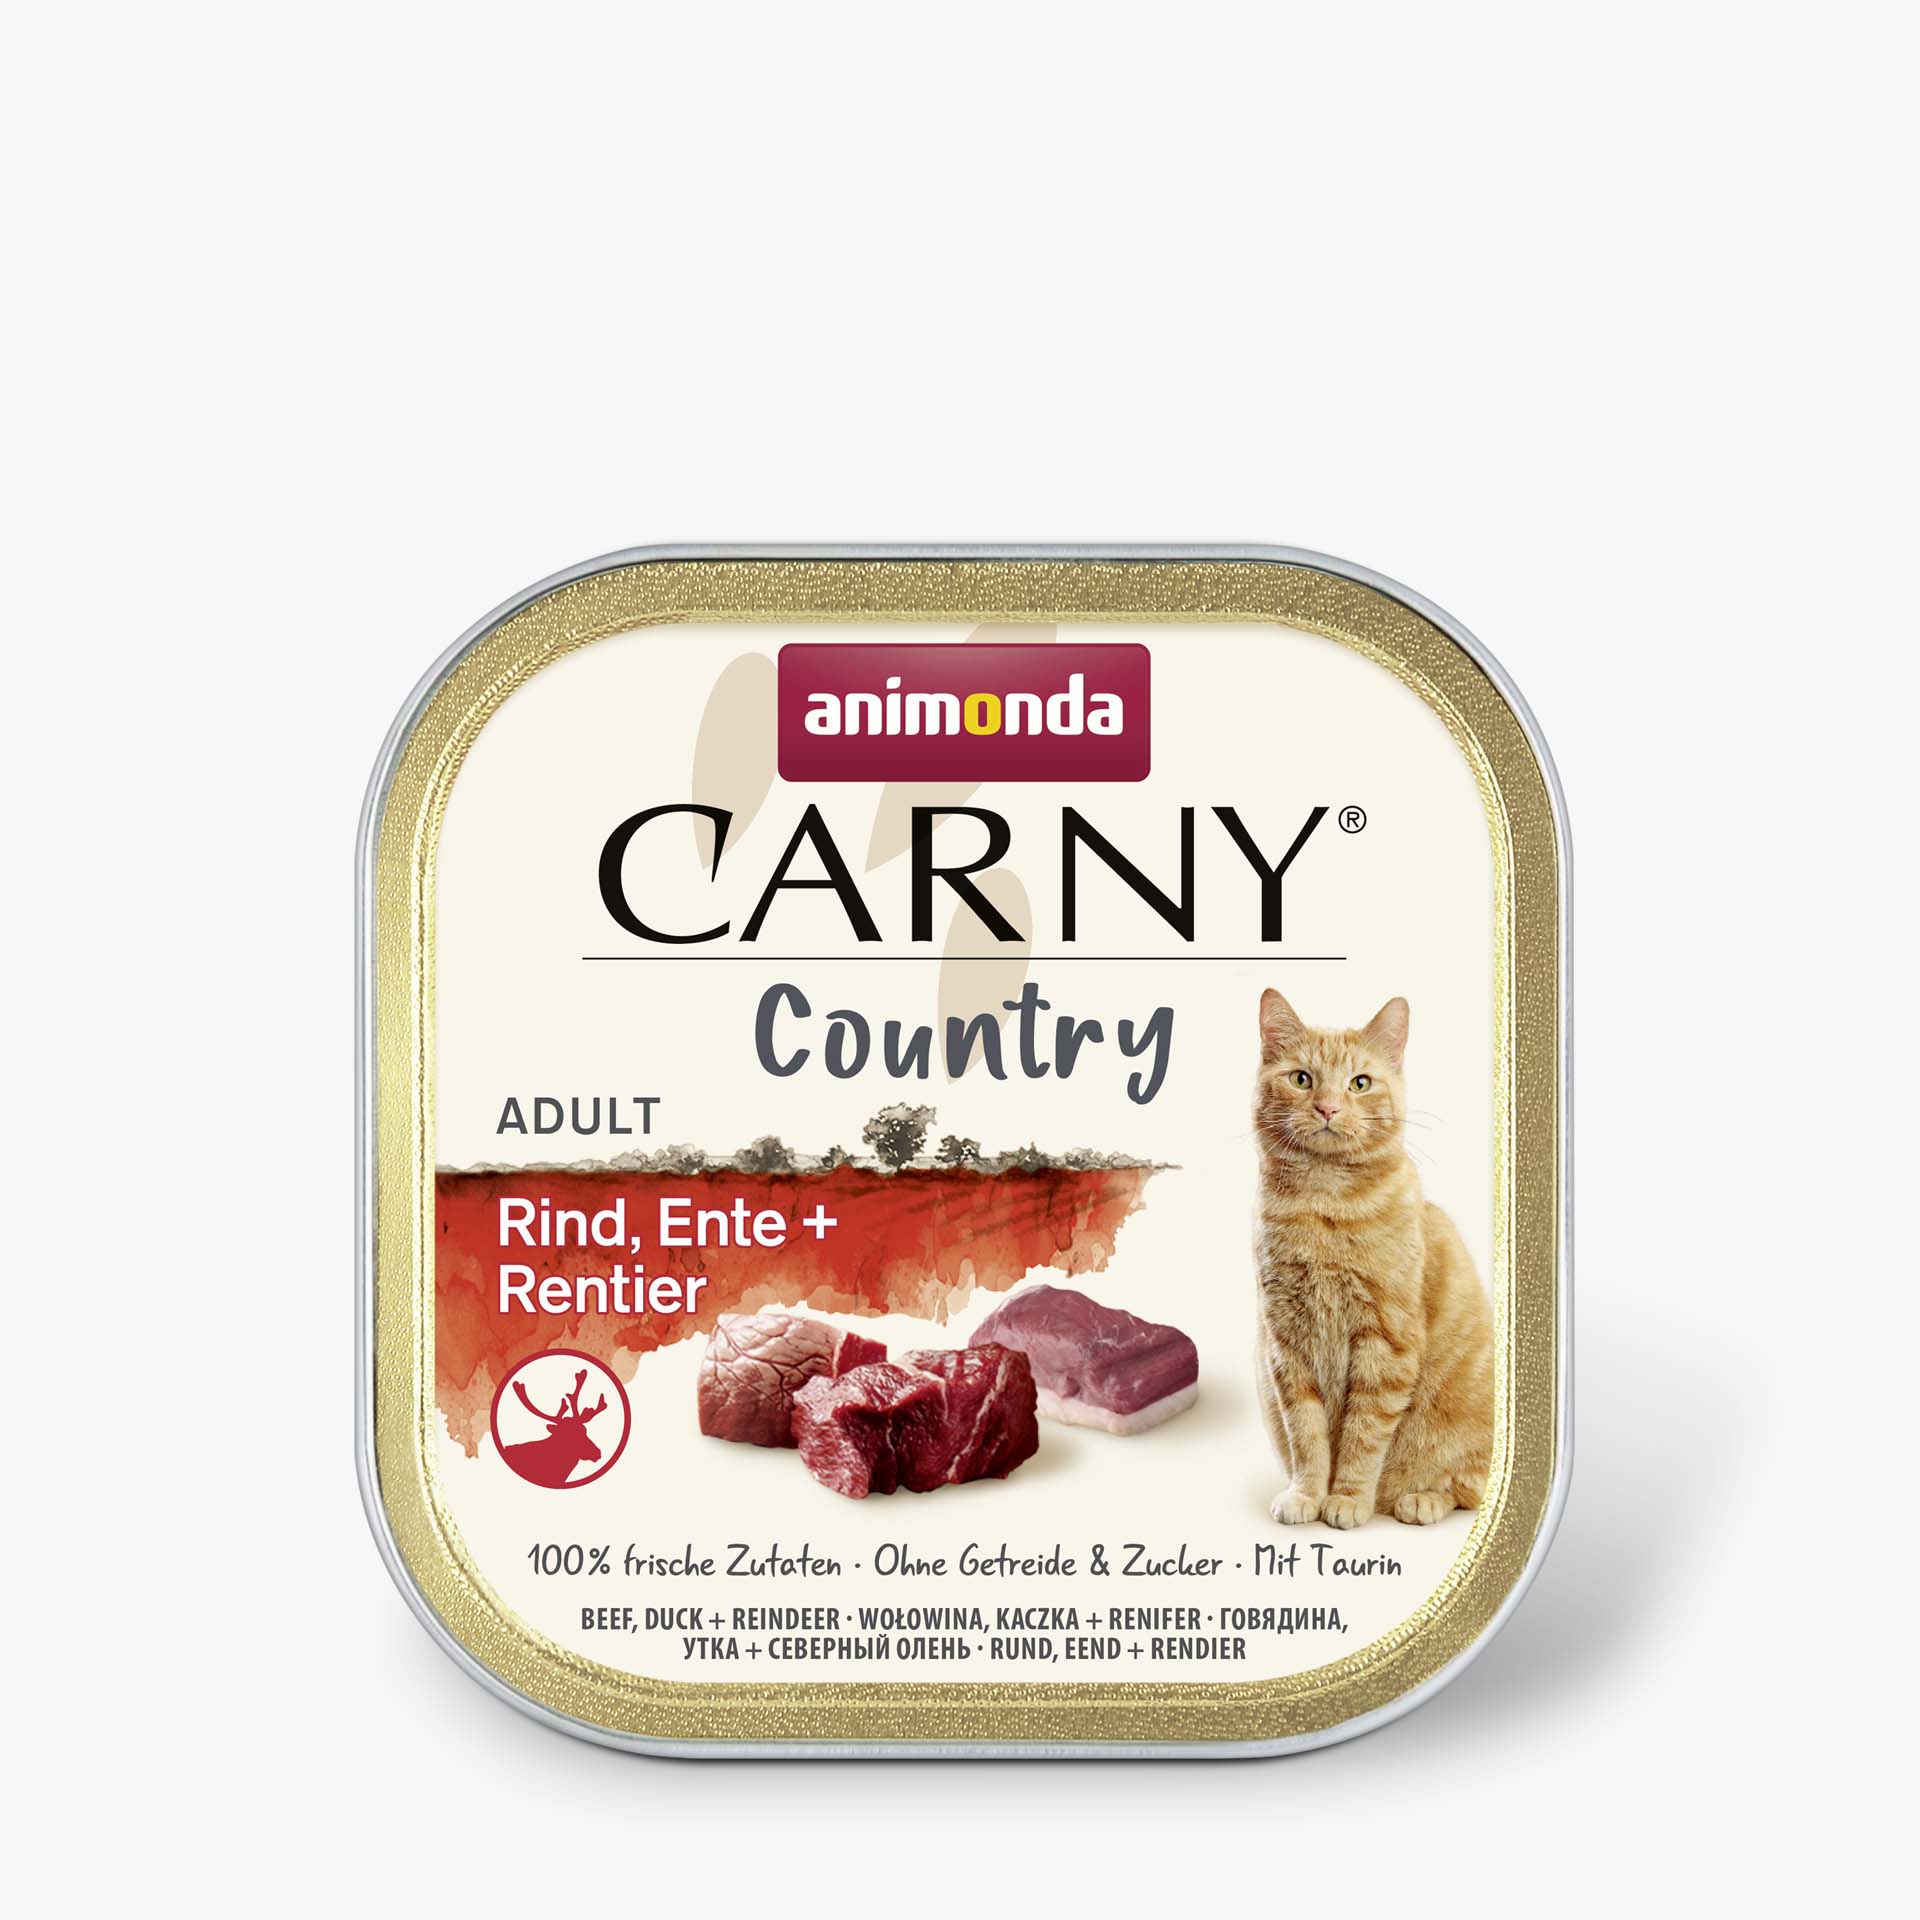 Carny Adult Country Rind, Ente + Rentier